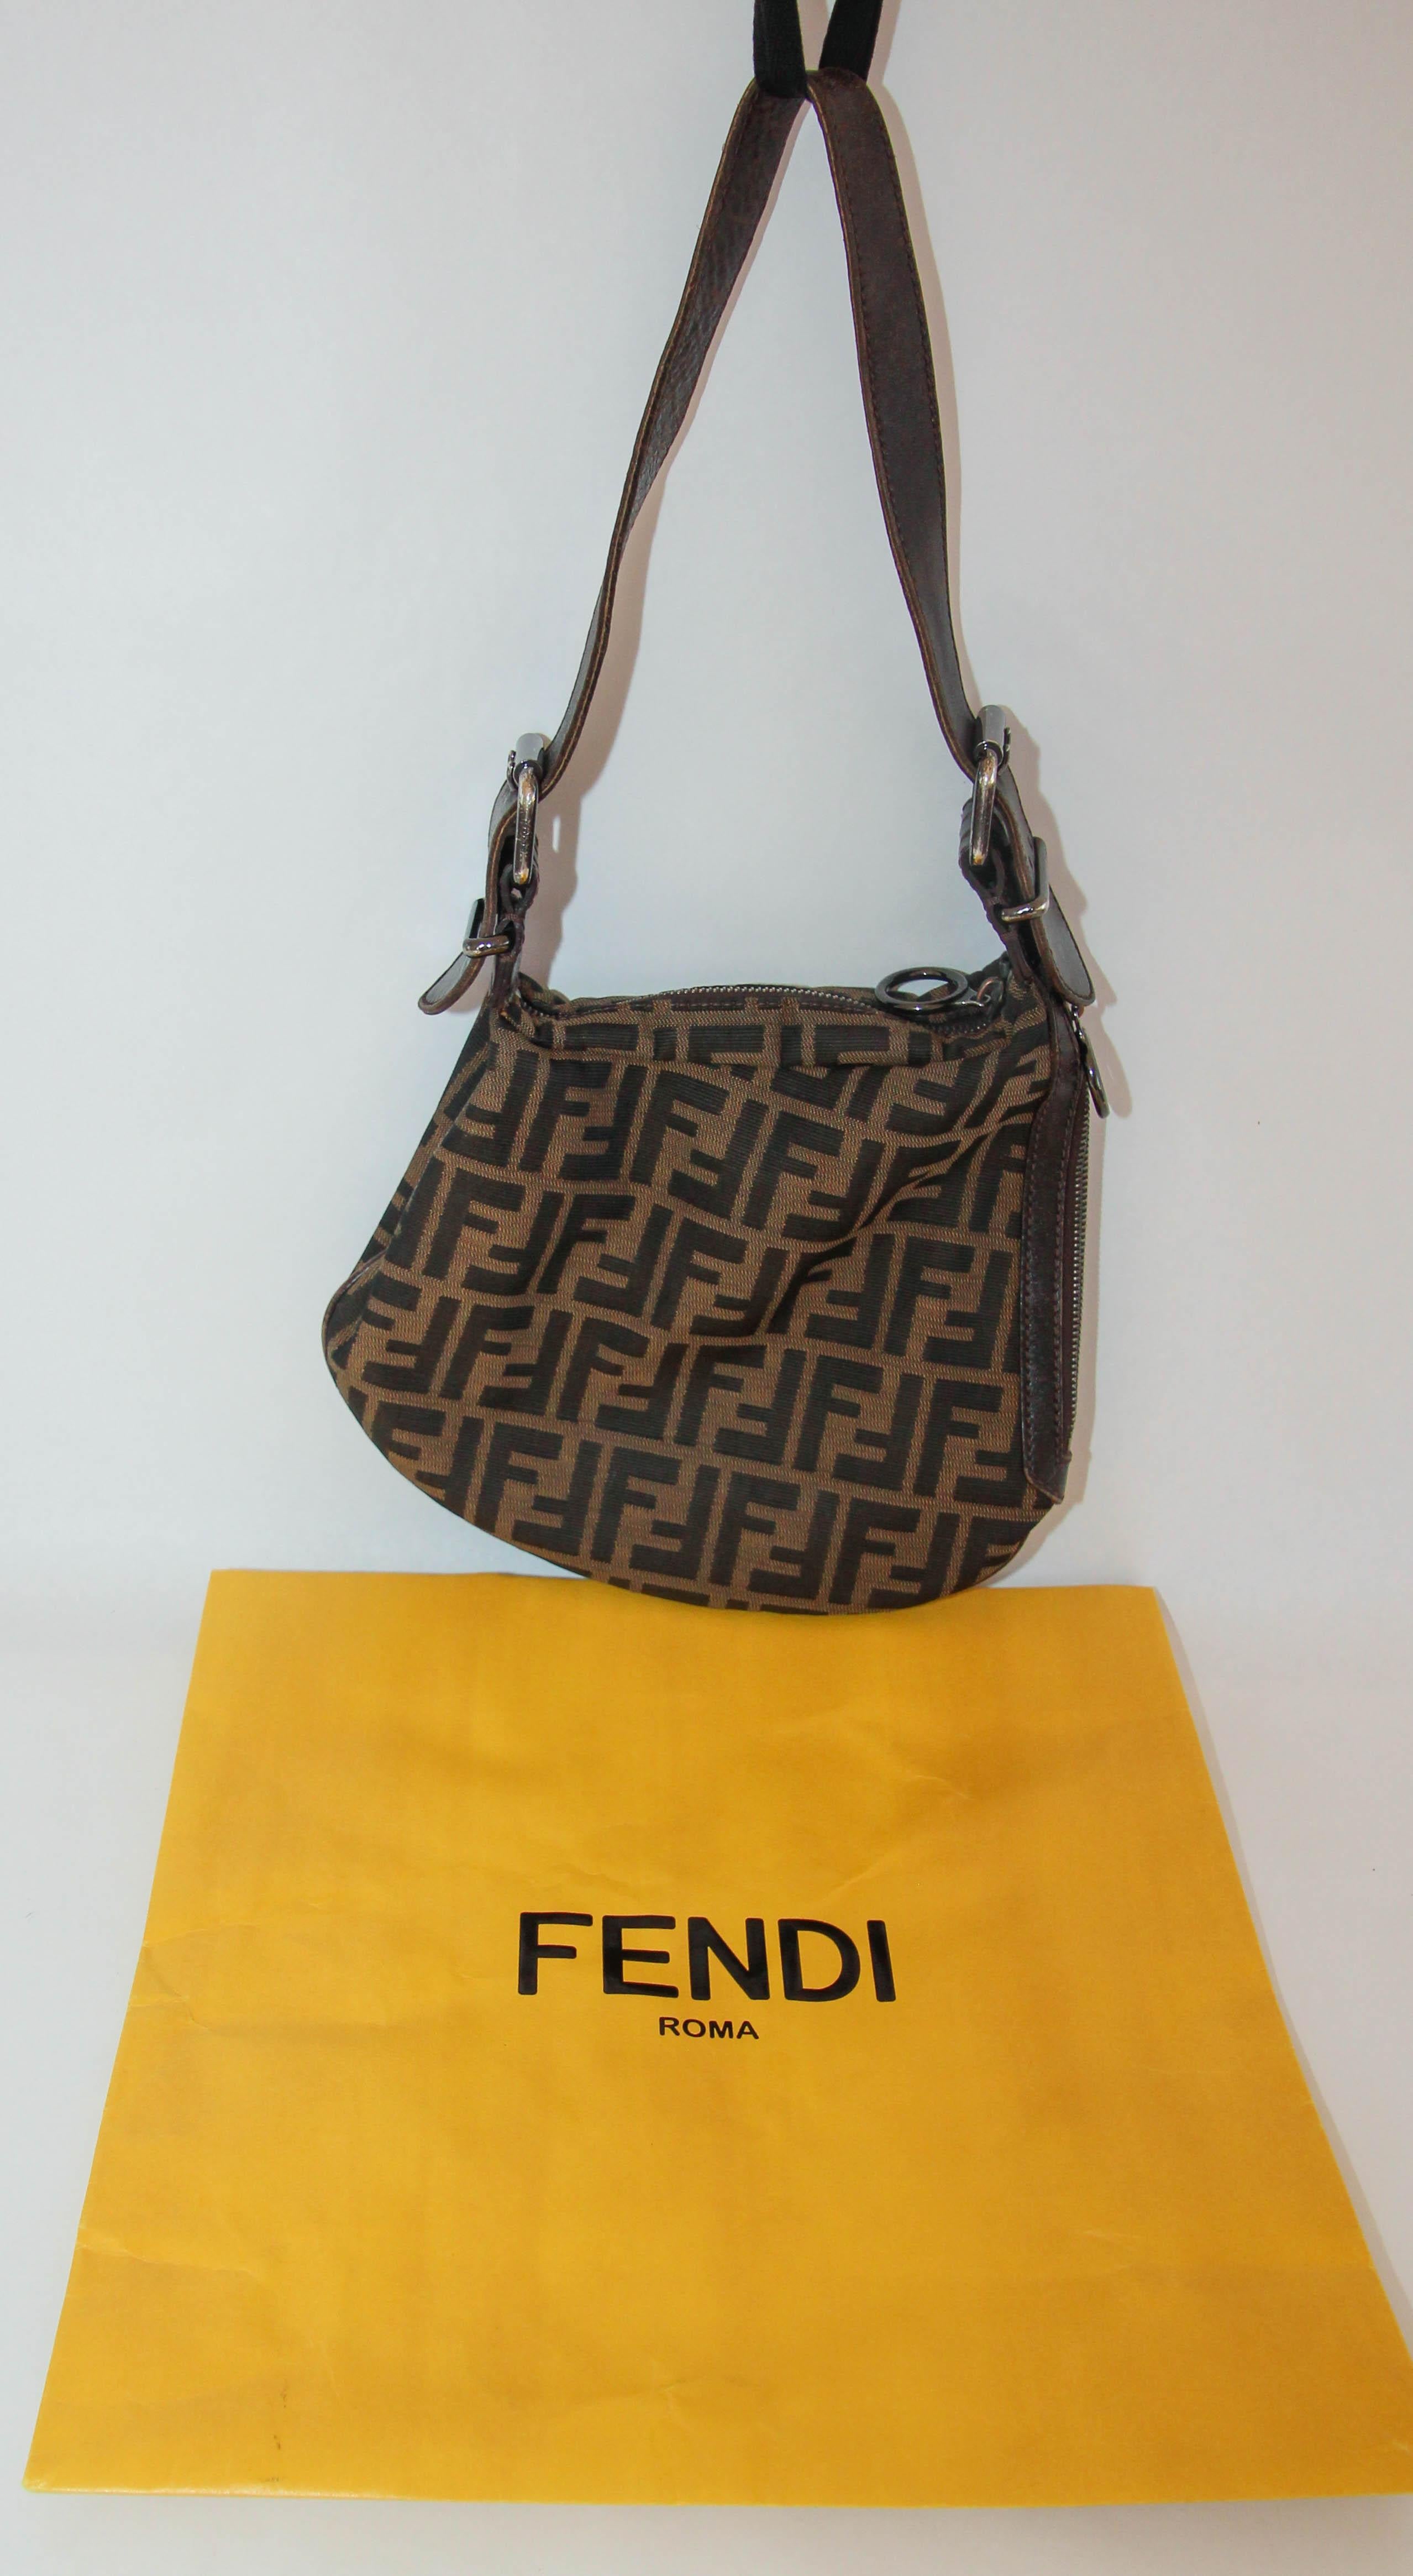 Fendi  FF print shoulder Oyster bag.
Zucca FF print shoulder hobo bag.
Fendi Oyster vintage shoulder bag in great condition.  Inside and outside are in great condition. 
Go for a modern yet intriguing finish with this stylish hobo by